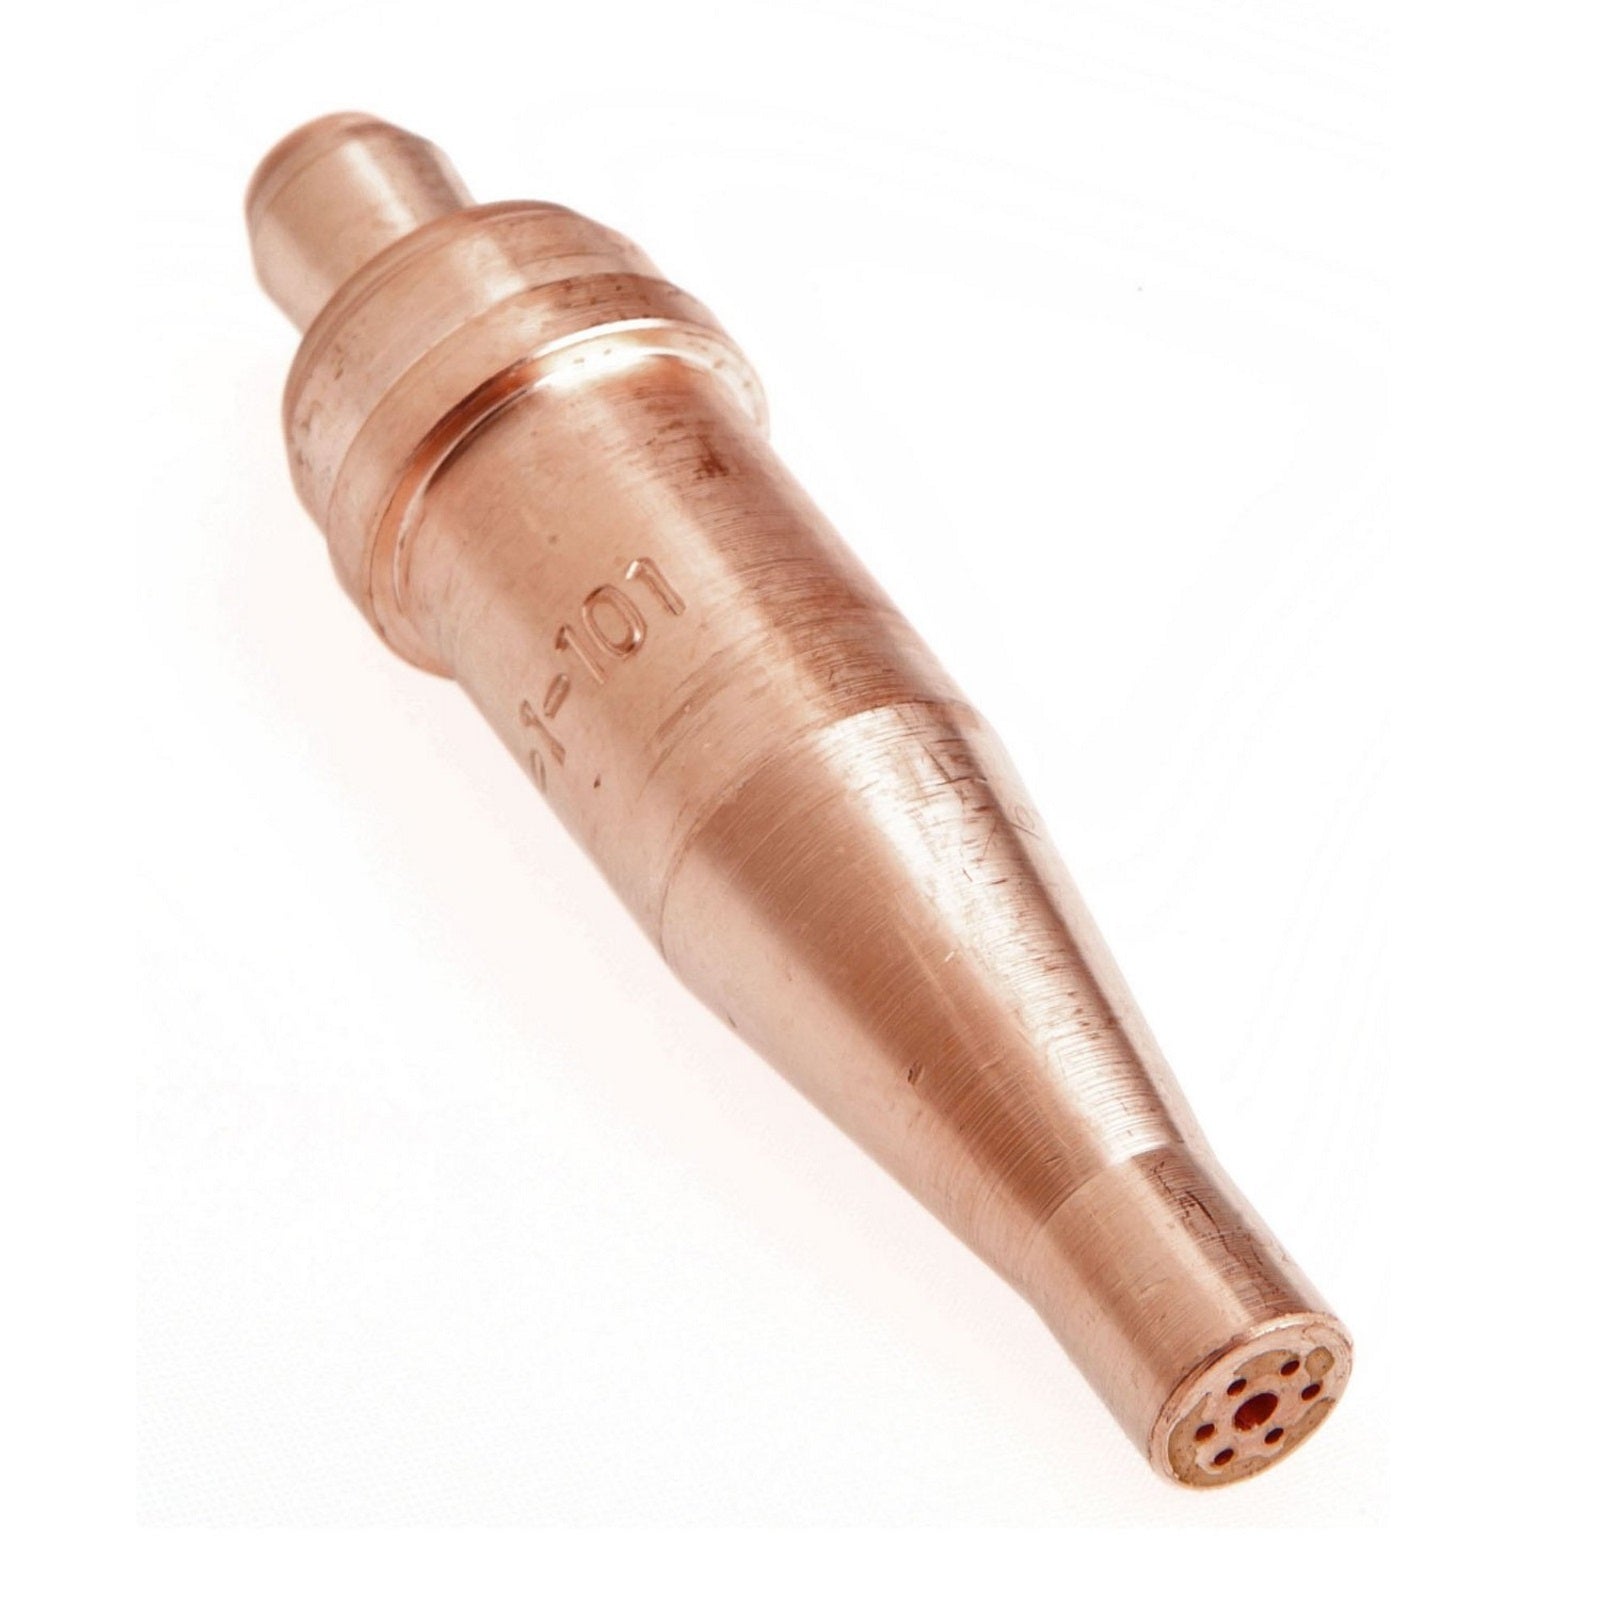 Victor Series 1 Type 101 Acetylene Cutting Tip - Size 1 (0330-0005)